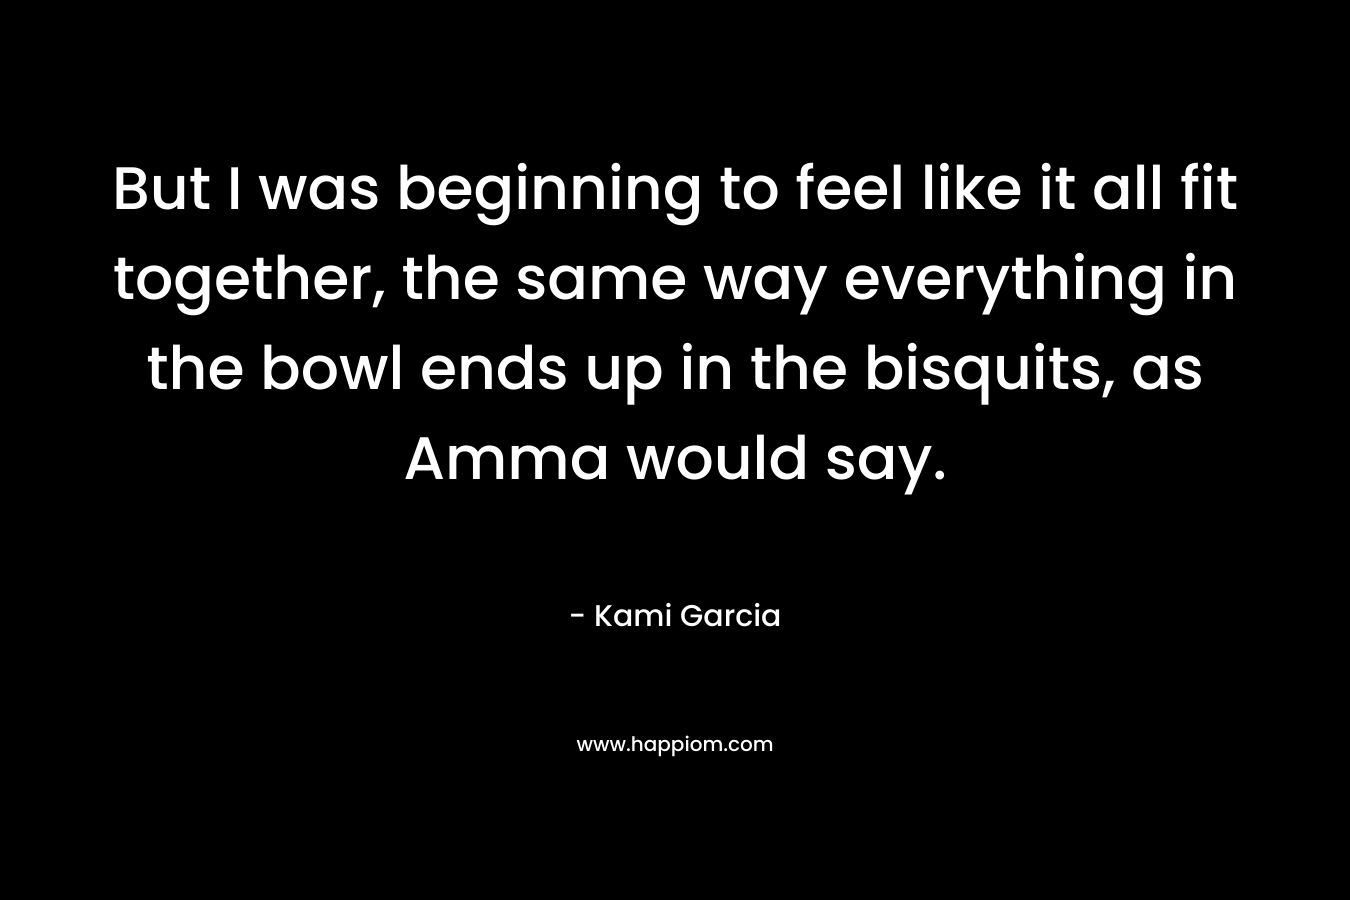 But I was beginning to feel like it all fit together, the same way everything in the bowl ends up in the bisquits, as Amma would say. – Kami Garcia